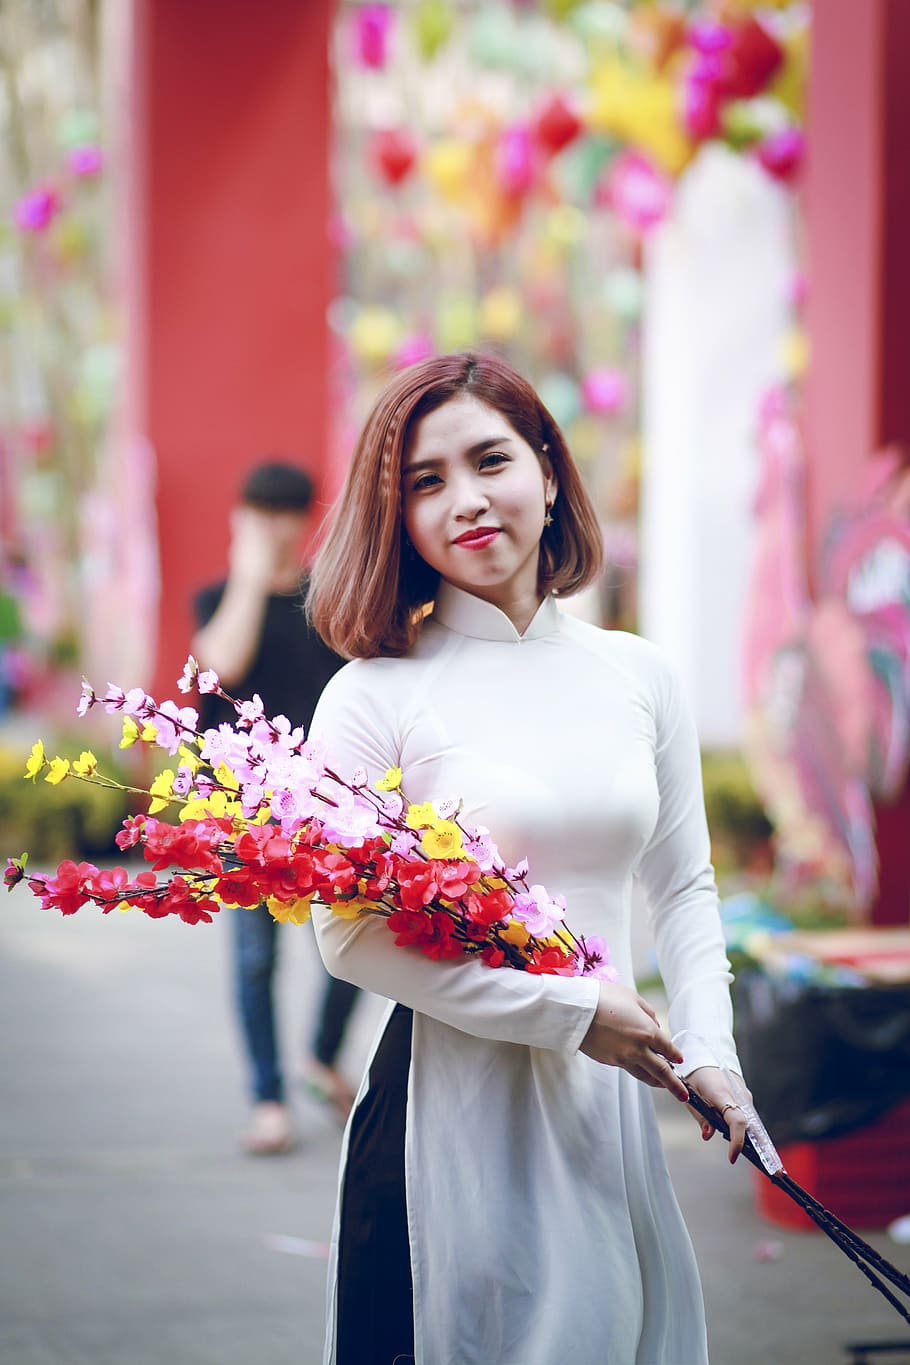 spring, the lunar new year, teen, flower, flowering plant, one person ...